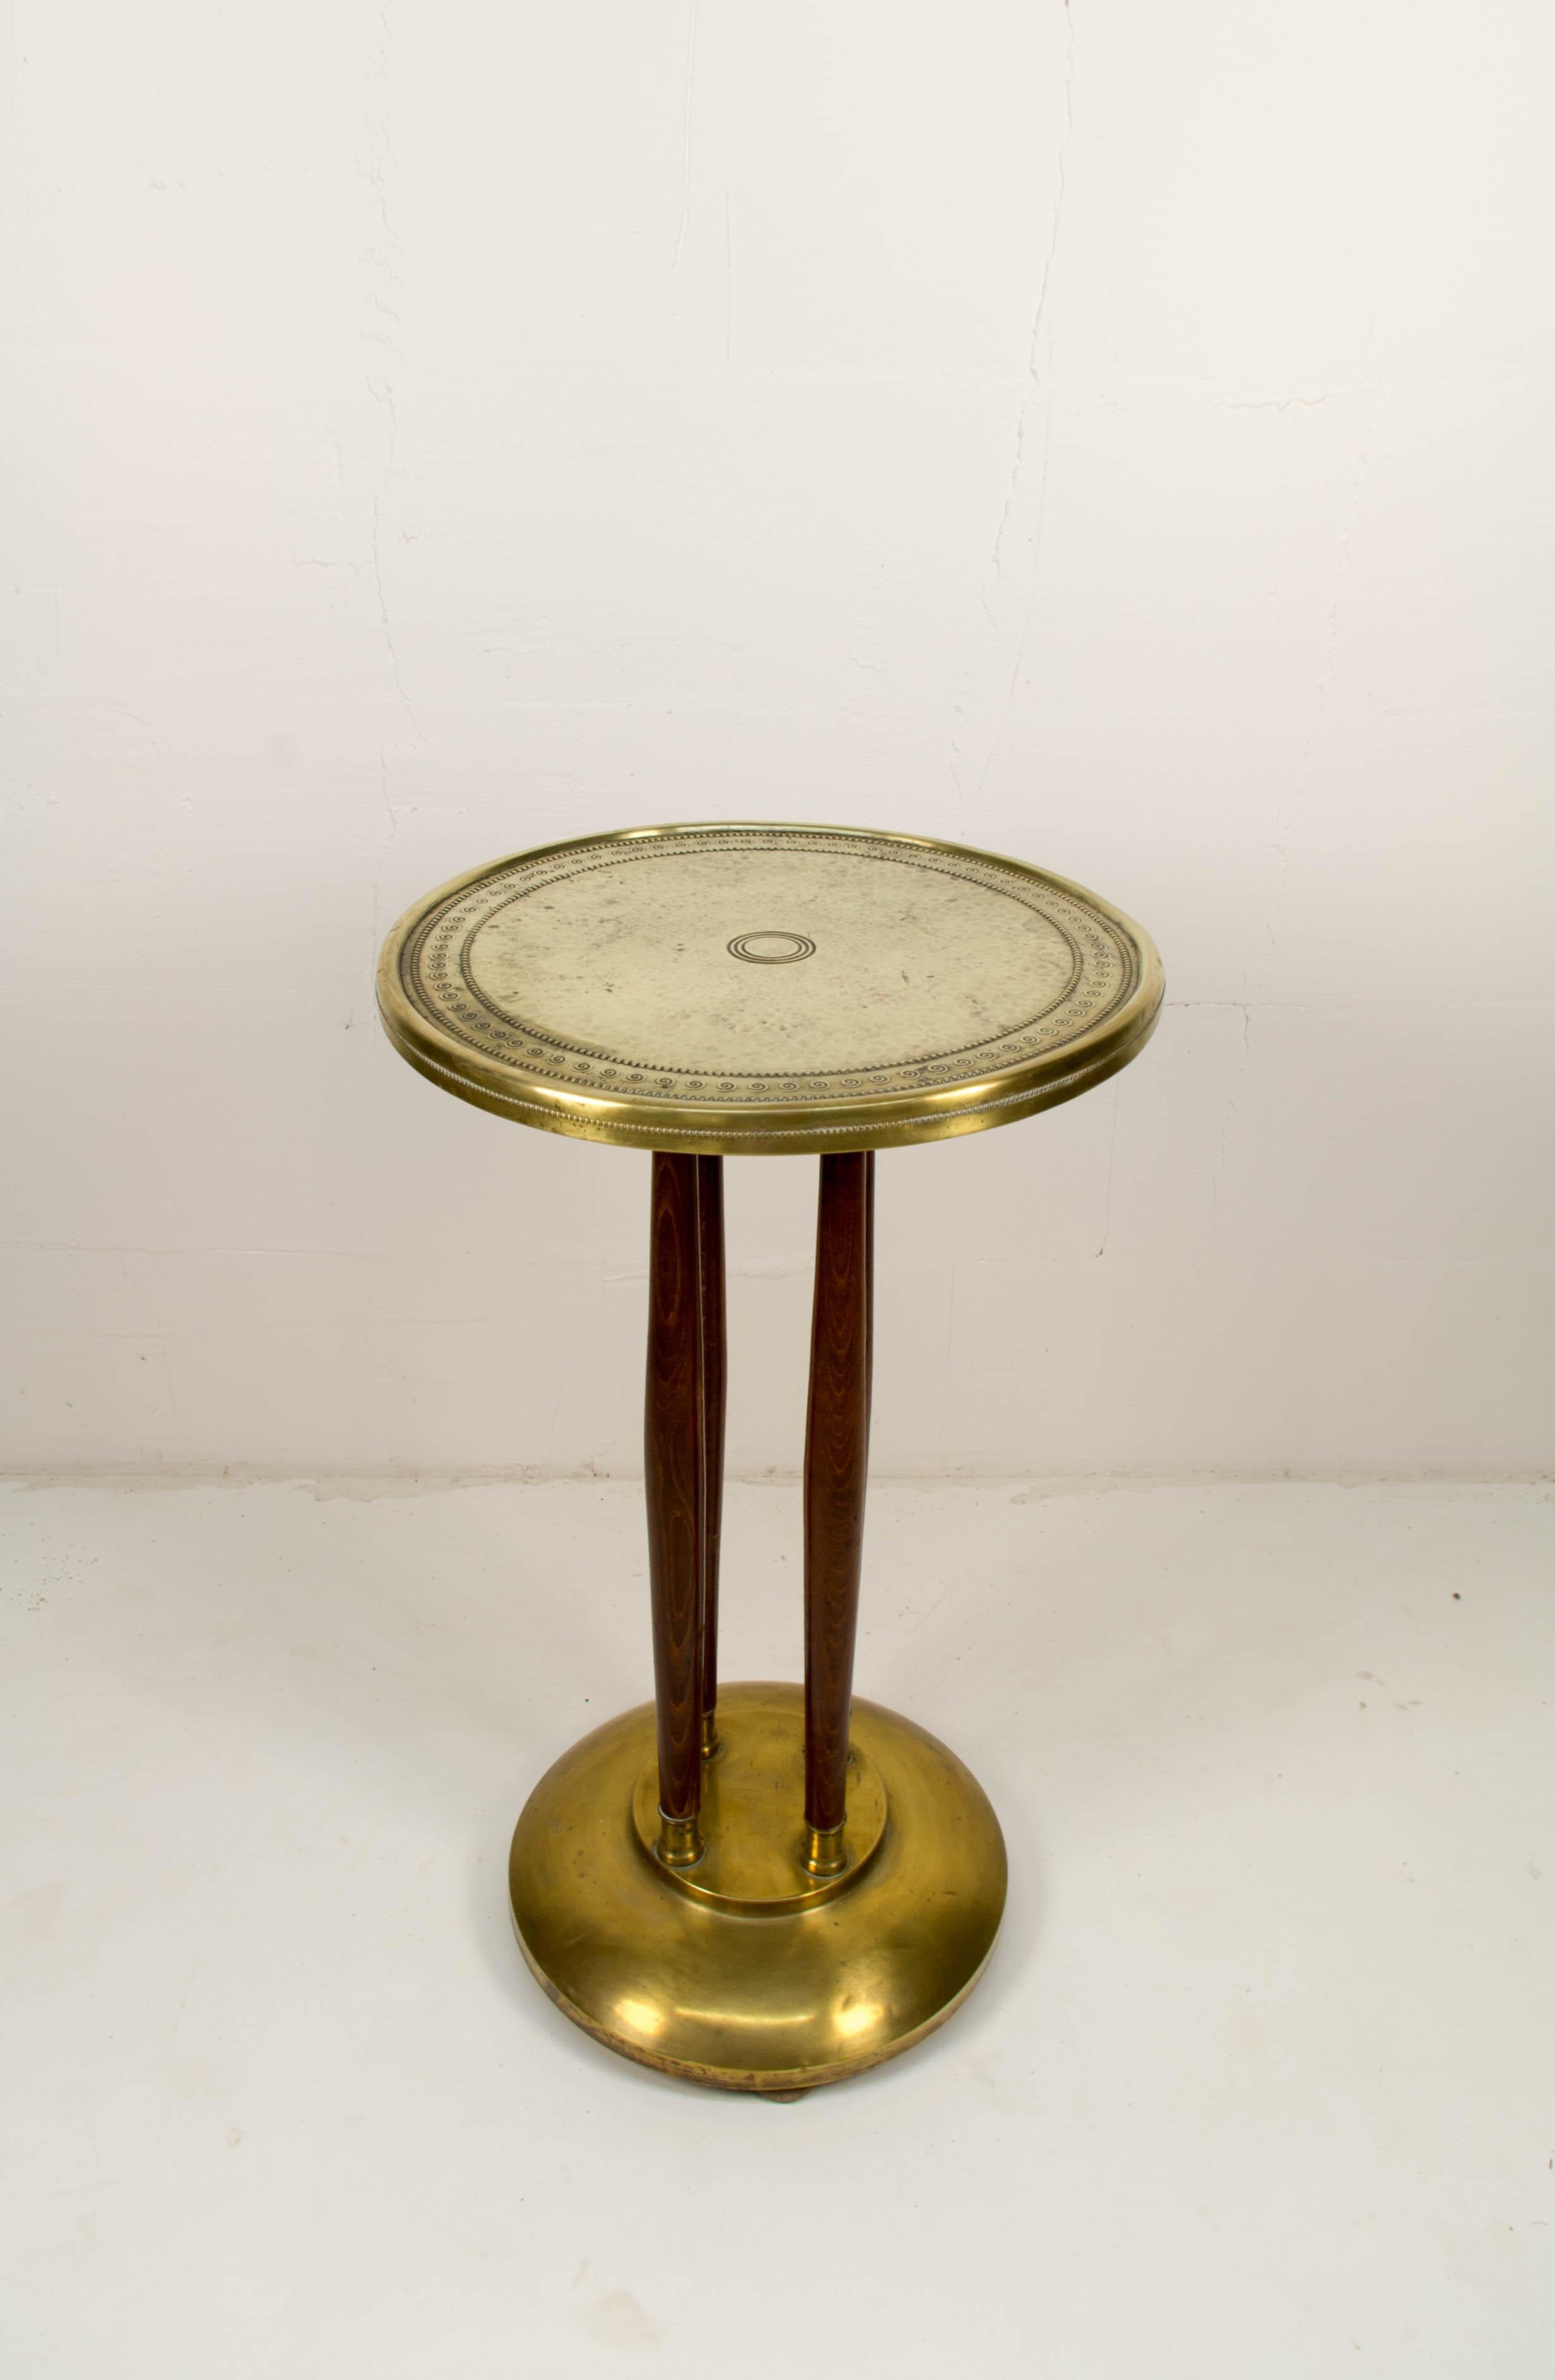 A four wood legs Art Nouveau smoker's table with brass base and top desk. Could be used as pedestal or flower table. Refurbished.